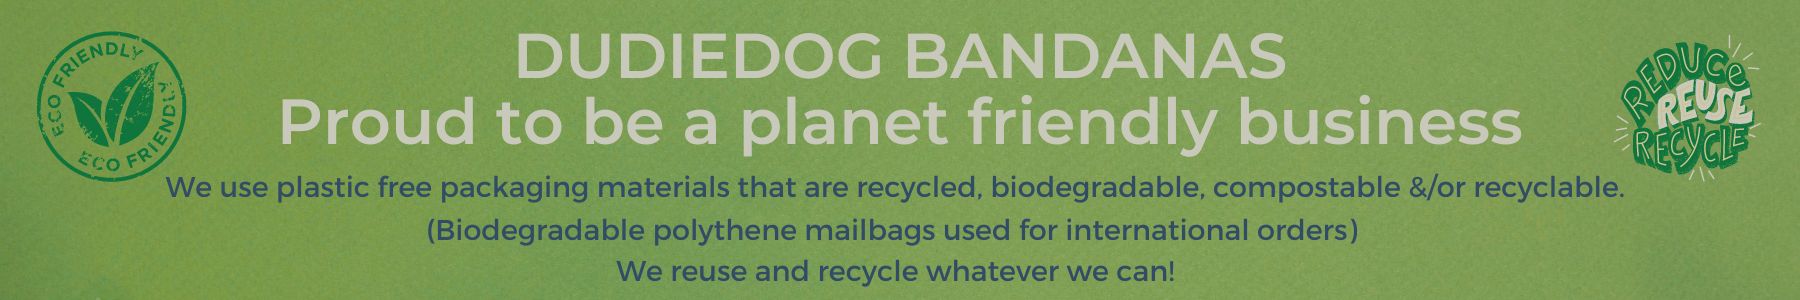 All about what Dudiedog Bandanas is doing to be more environmentally friendly. 